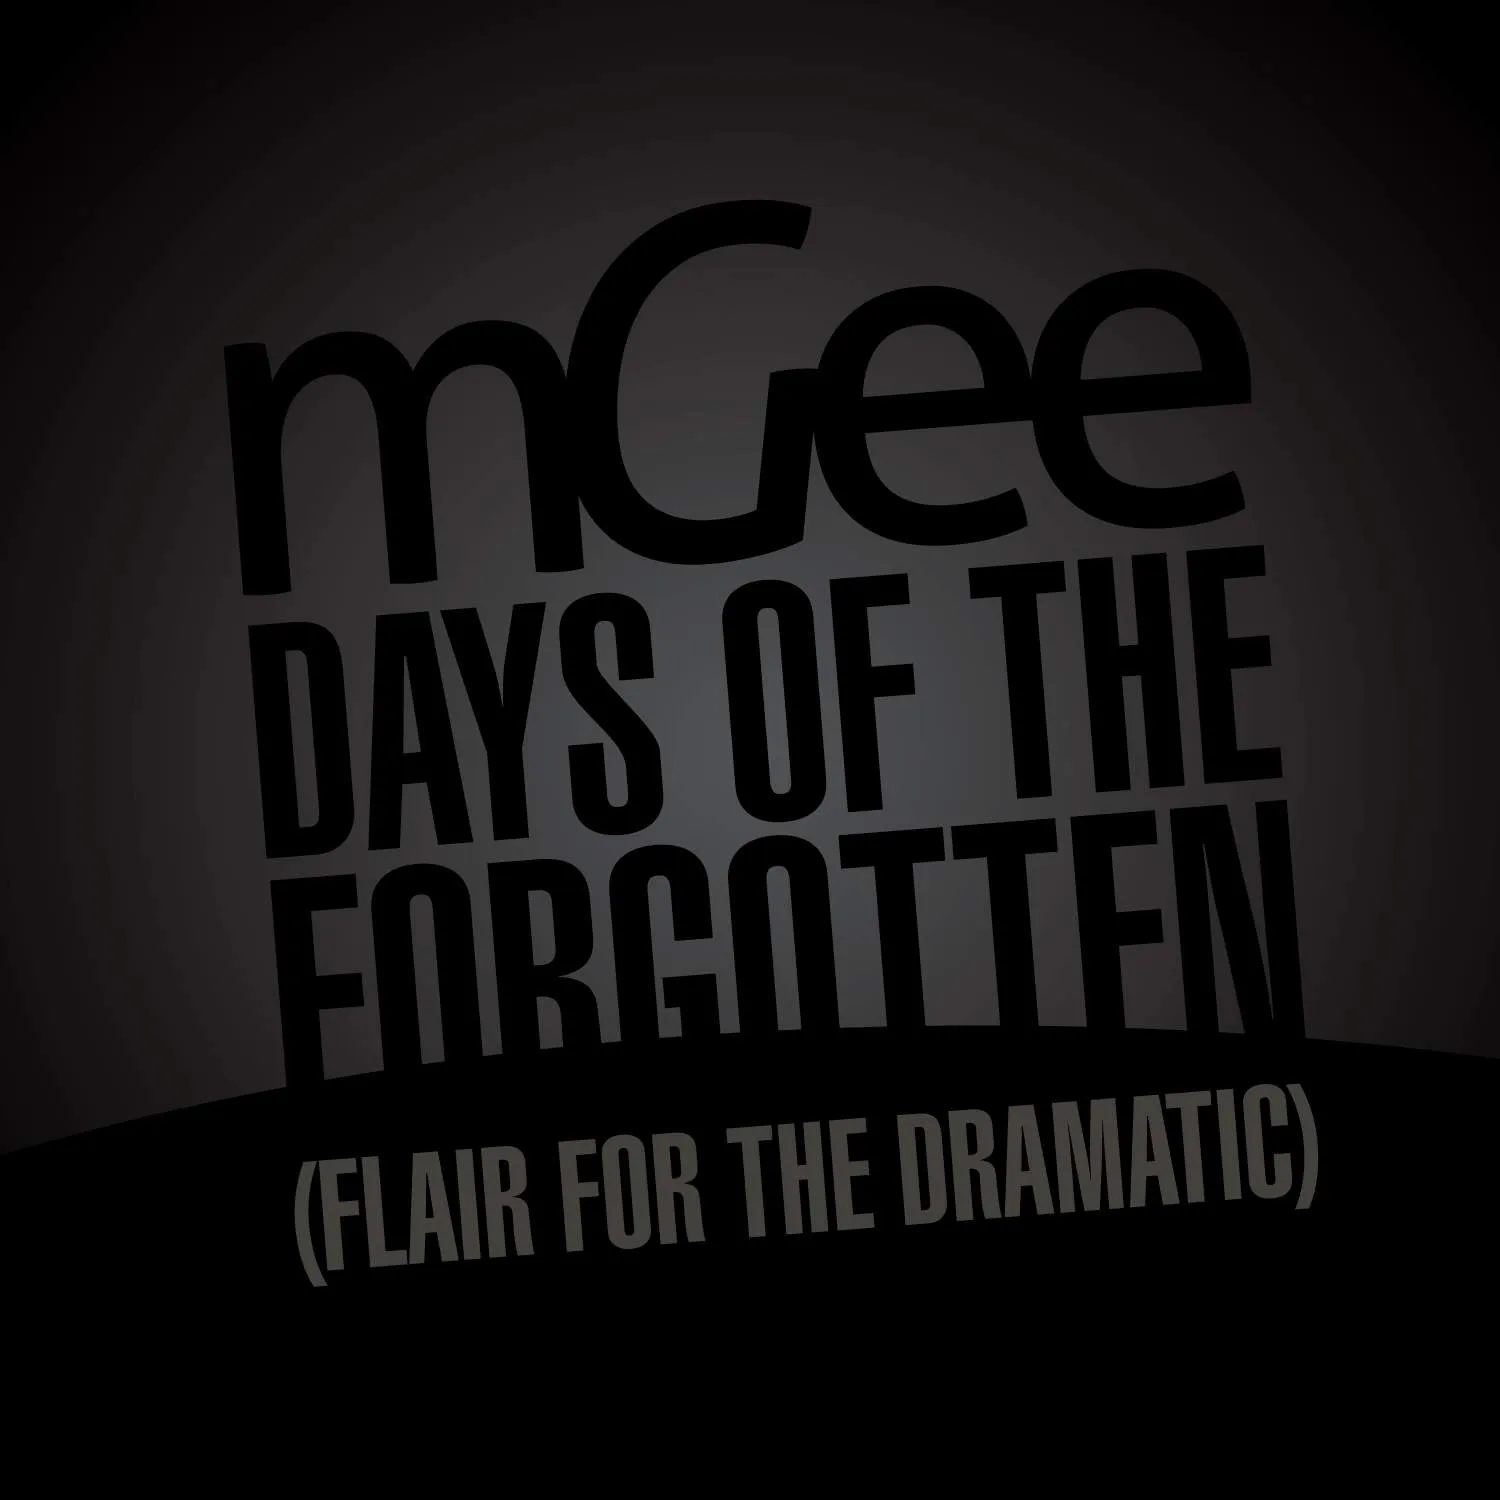 Cover art for Days Of The Forgotten (Flair For The Dramatic)